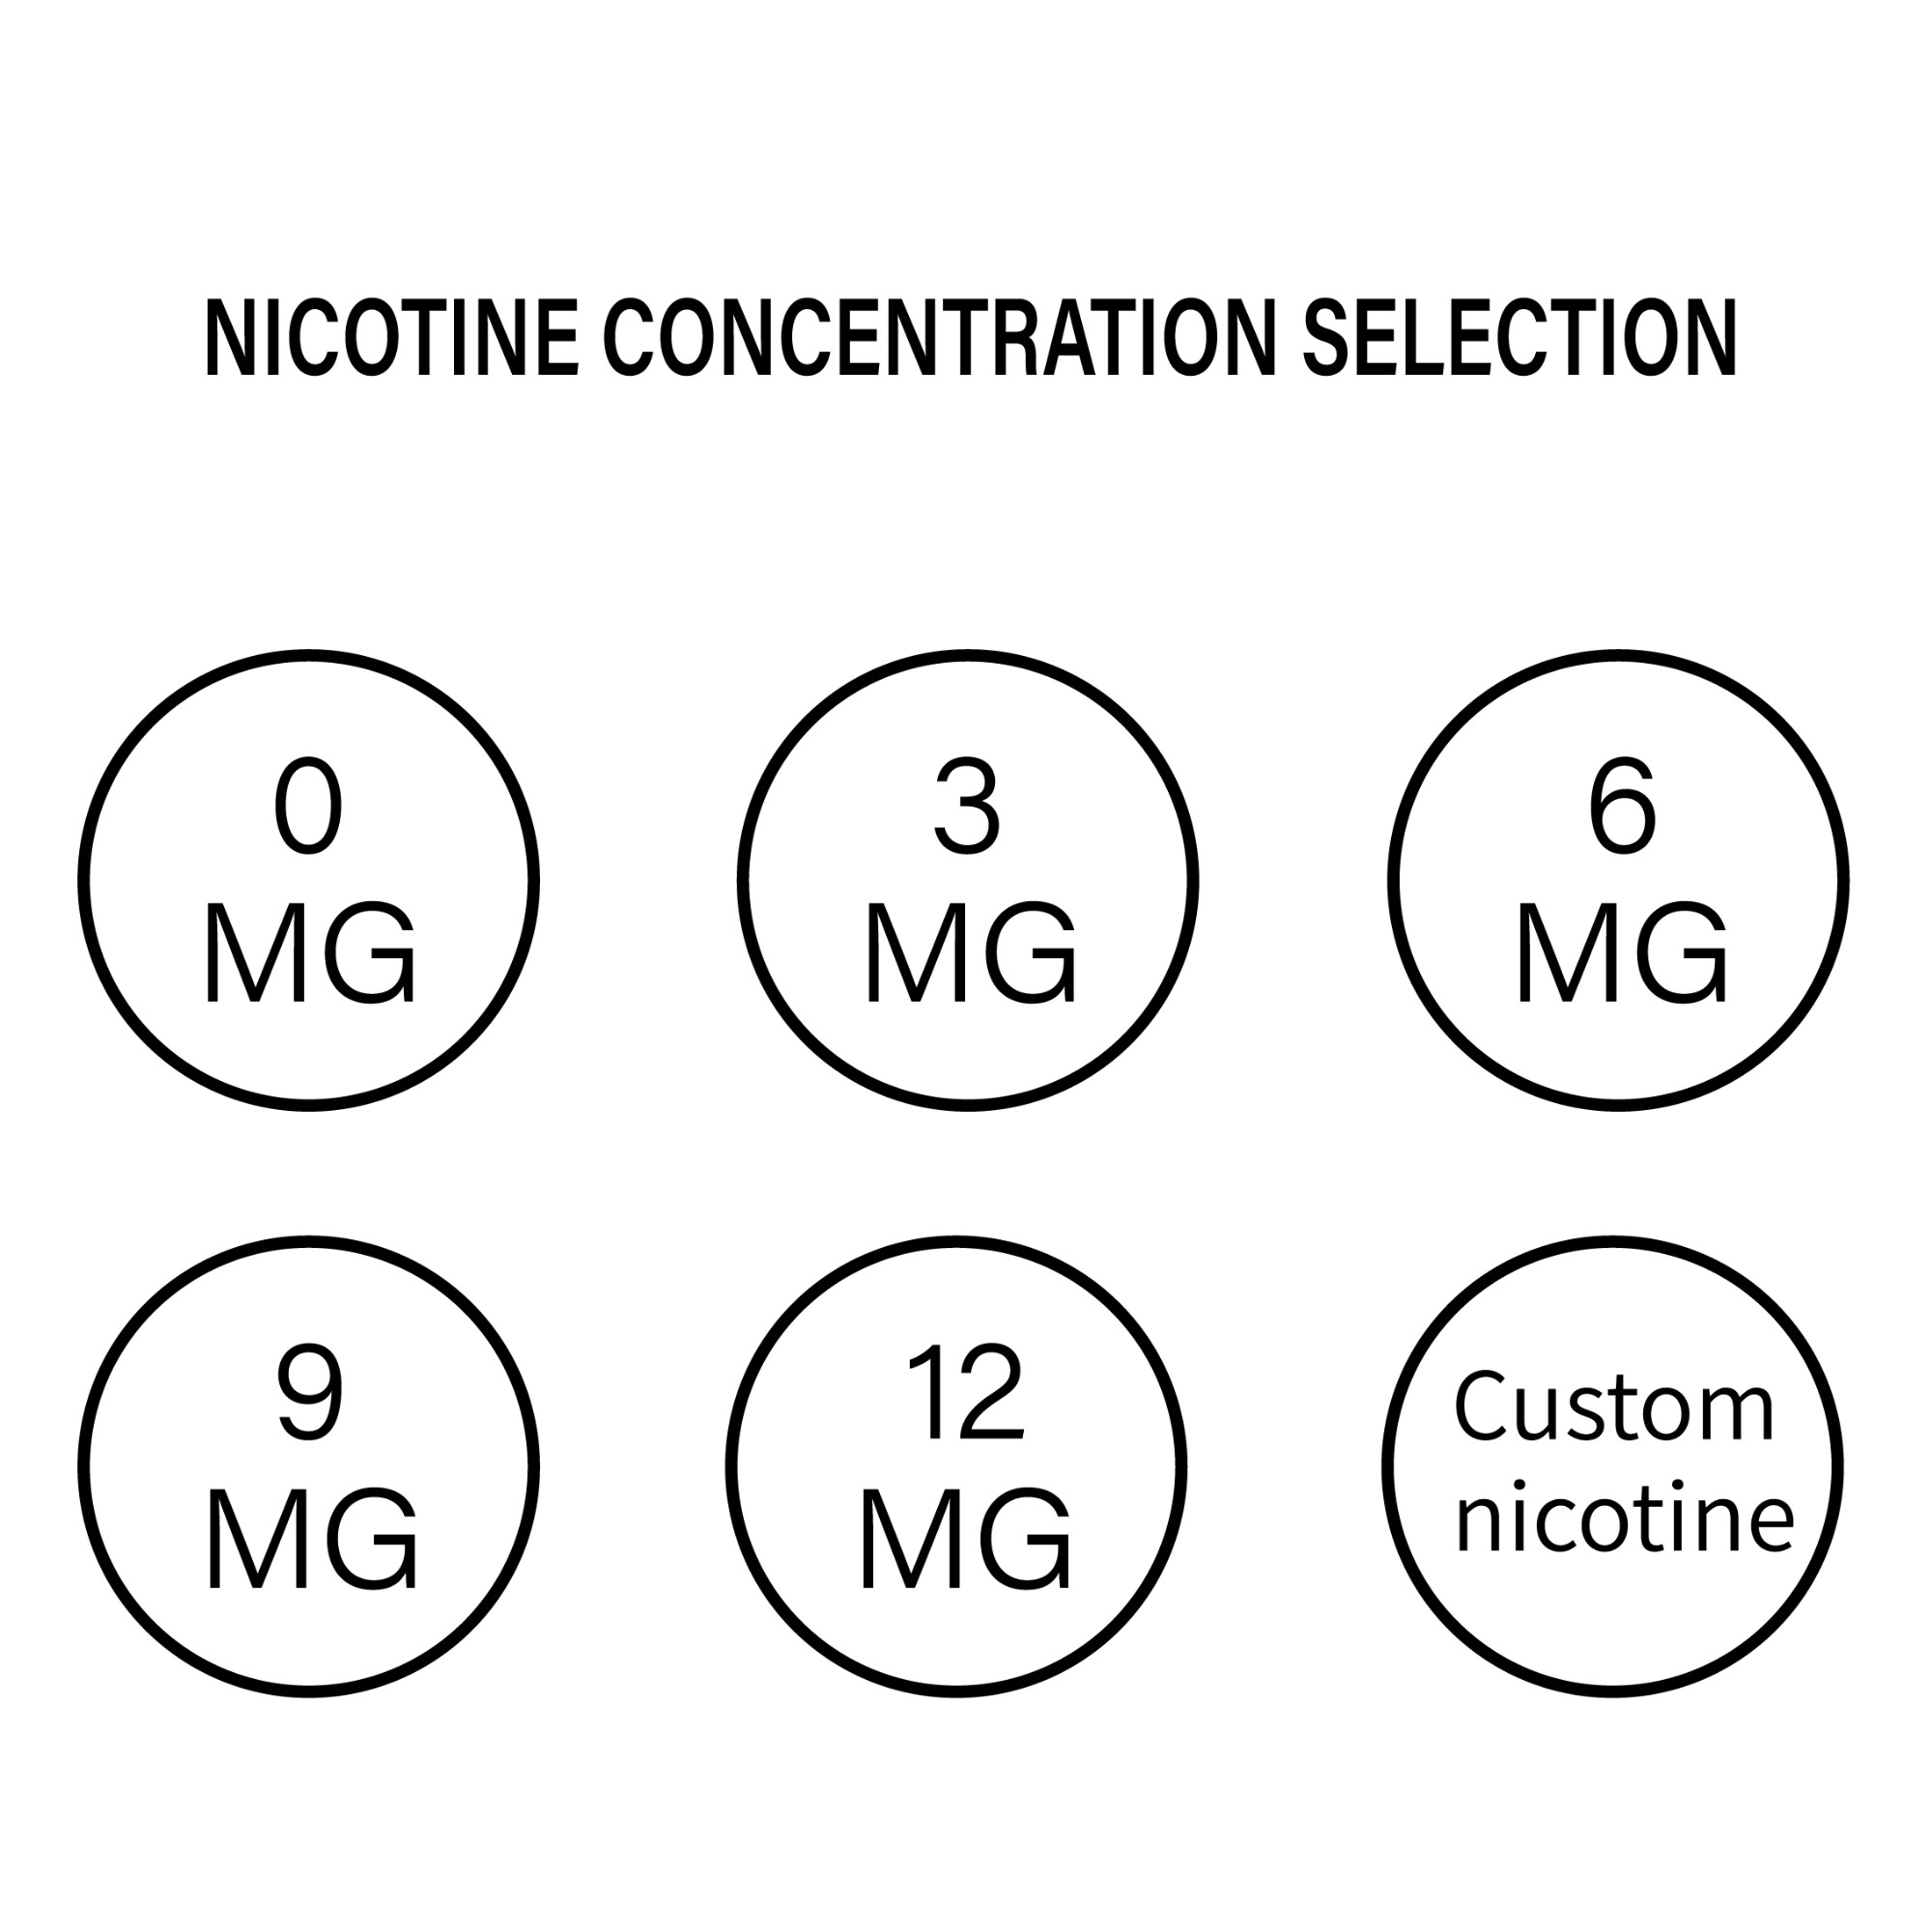 Nicotine concentration customized